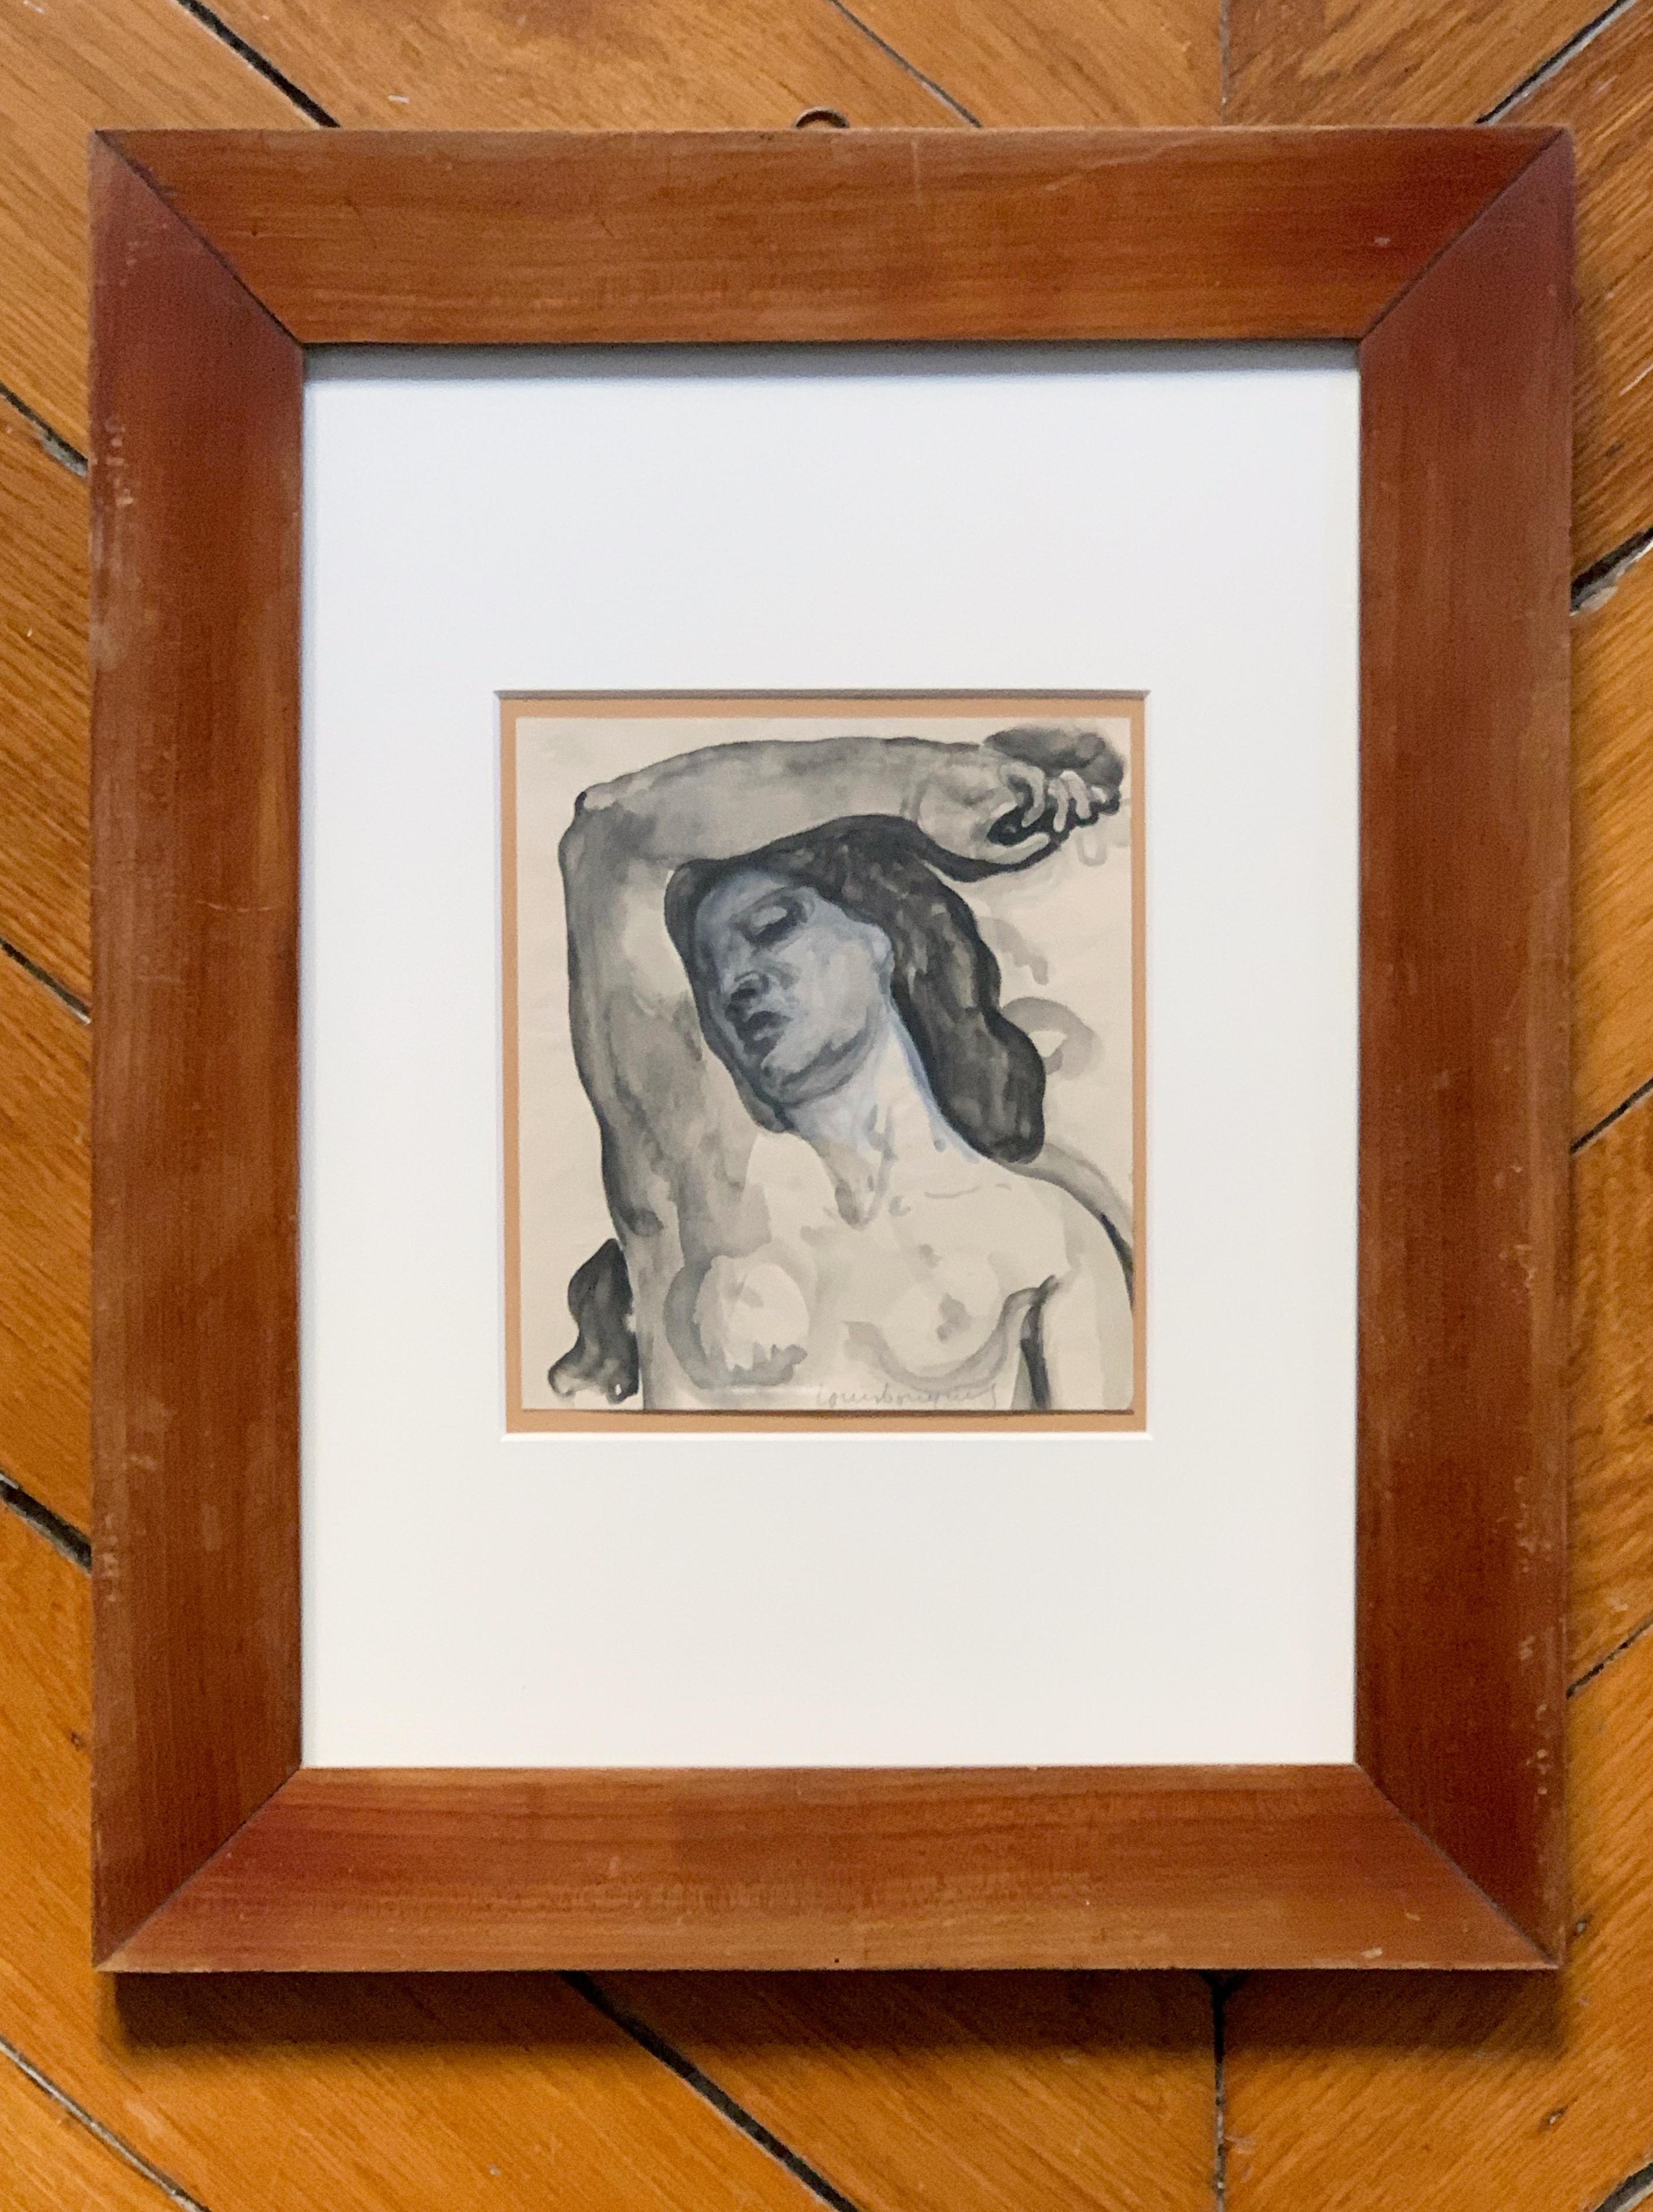 Bust of a nude woman with her arm raised - Art by Louis Bouquet